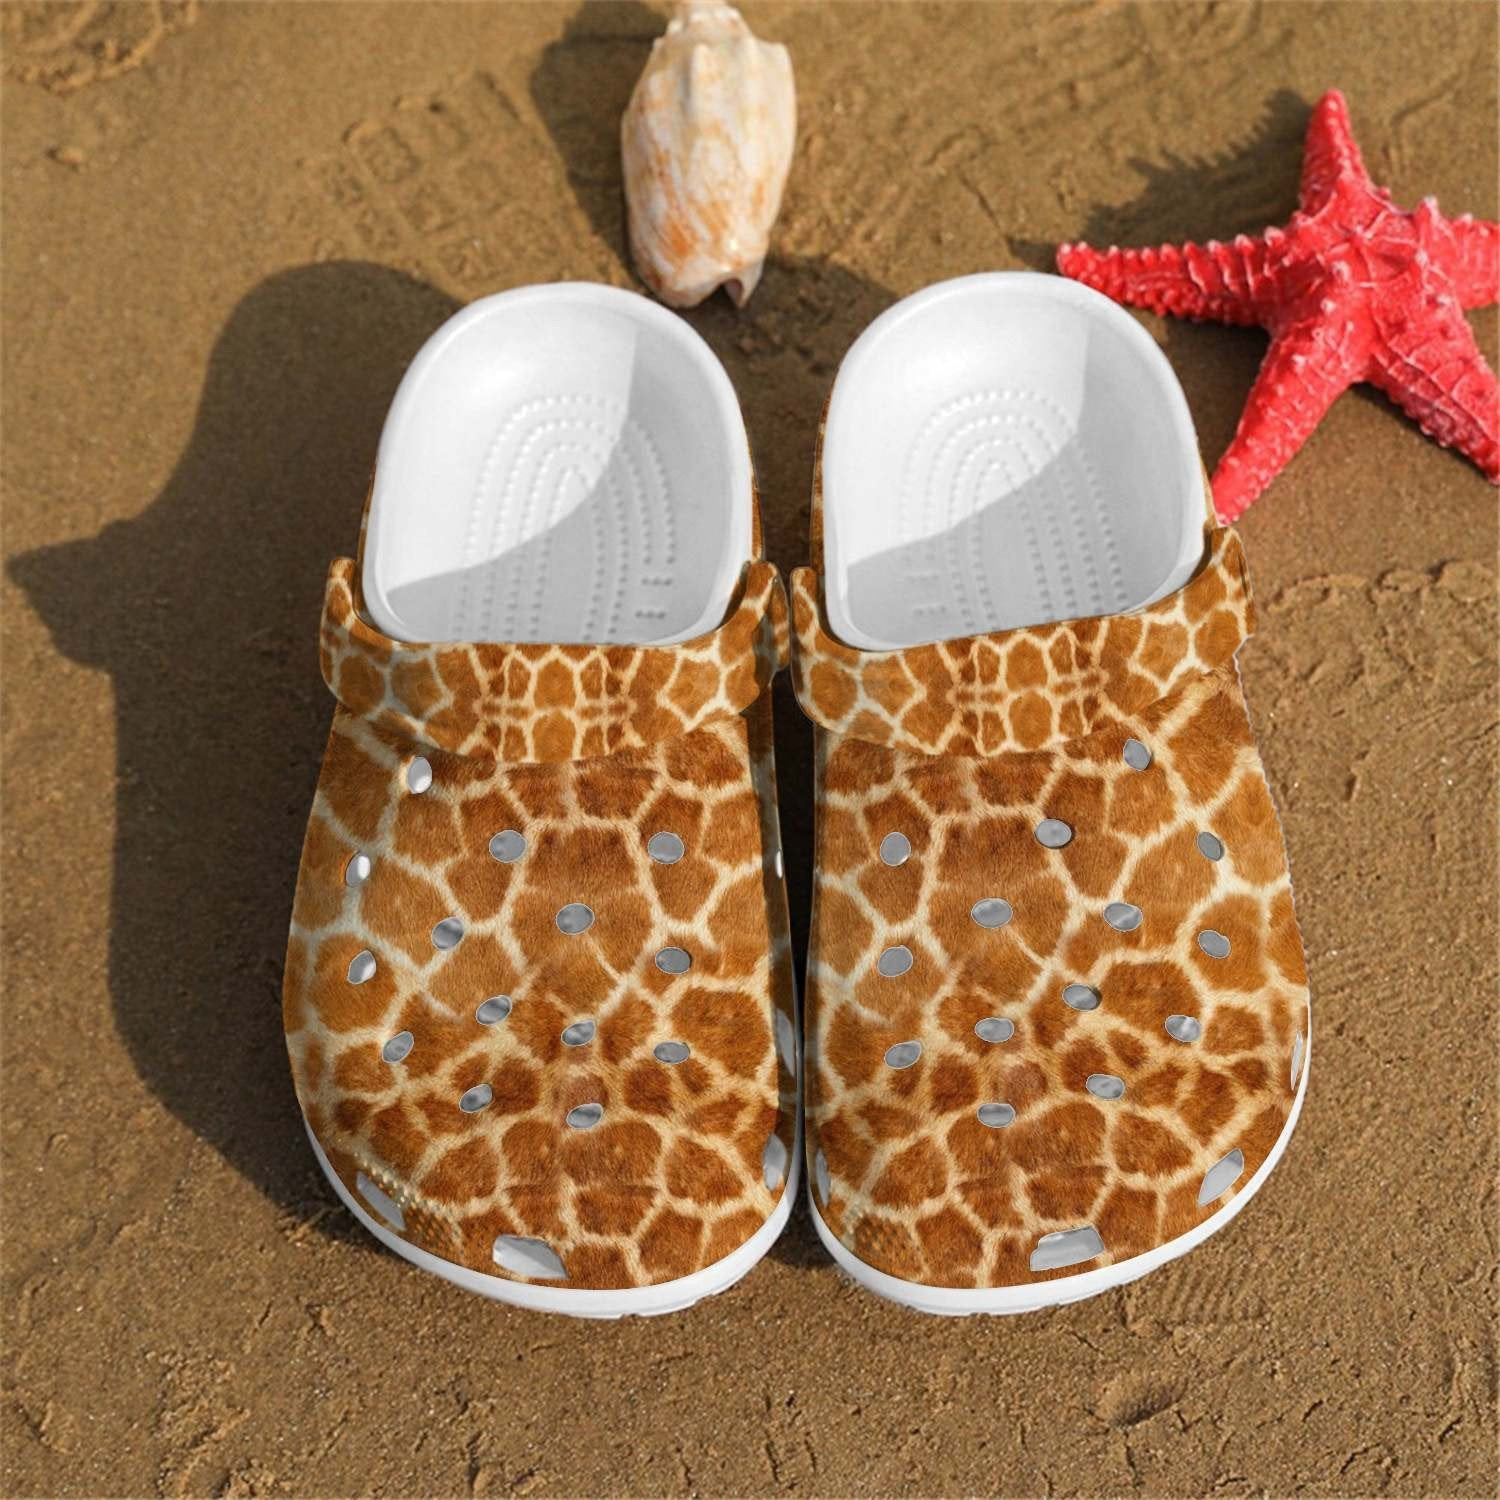 Giraffe Skin Pattern Crocs Shoes Crocbland Clogs Gifts For Son Daughter